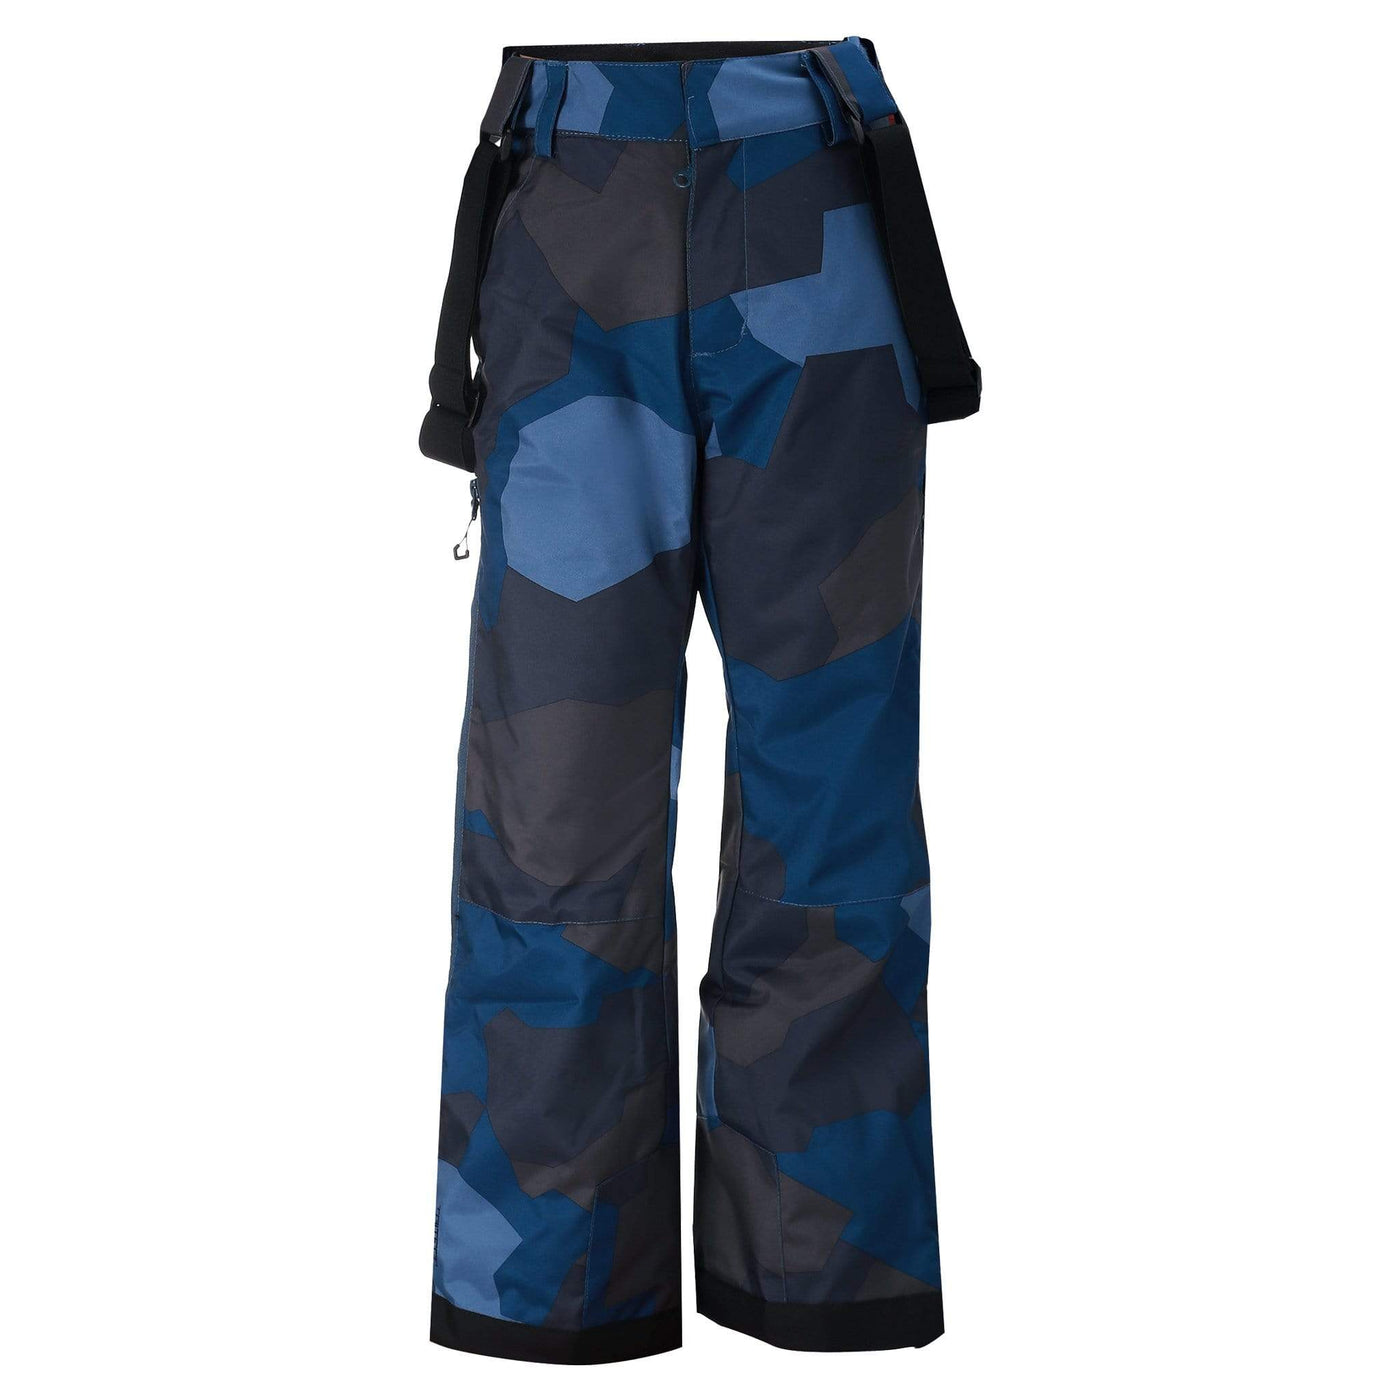 SnowKids Outerwear Pants 128 2117 Of Sweden Kids Lammhult Padded Ski Pant - Navy Camo